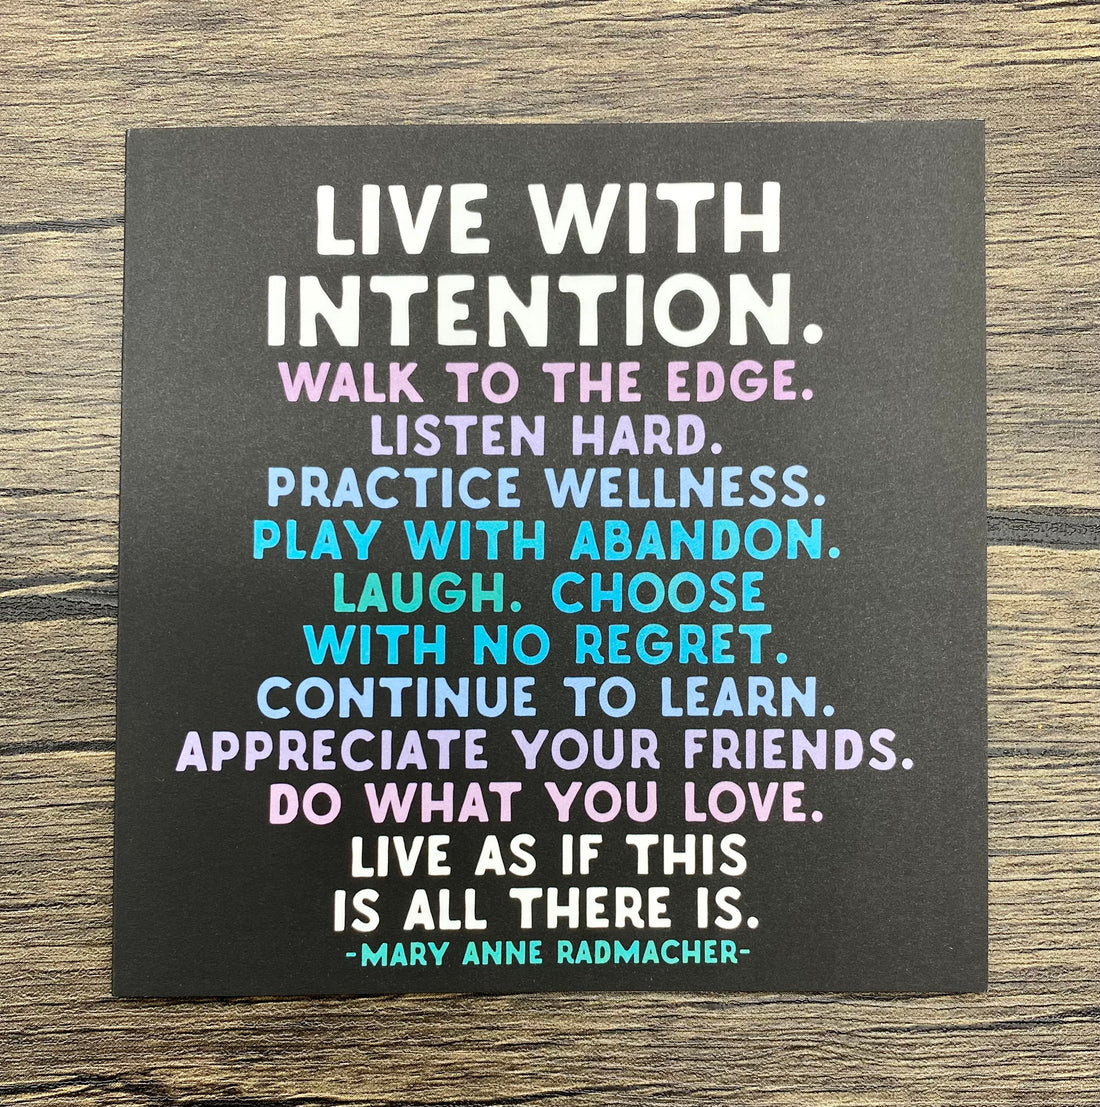 Quotable Card: Live with intention...